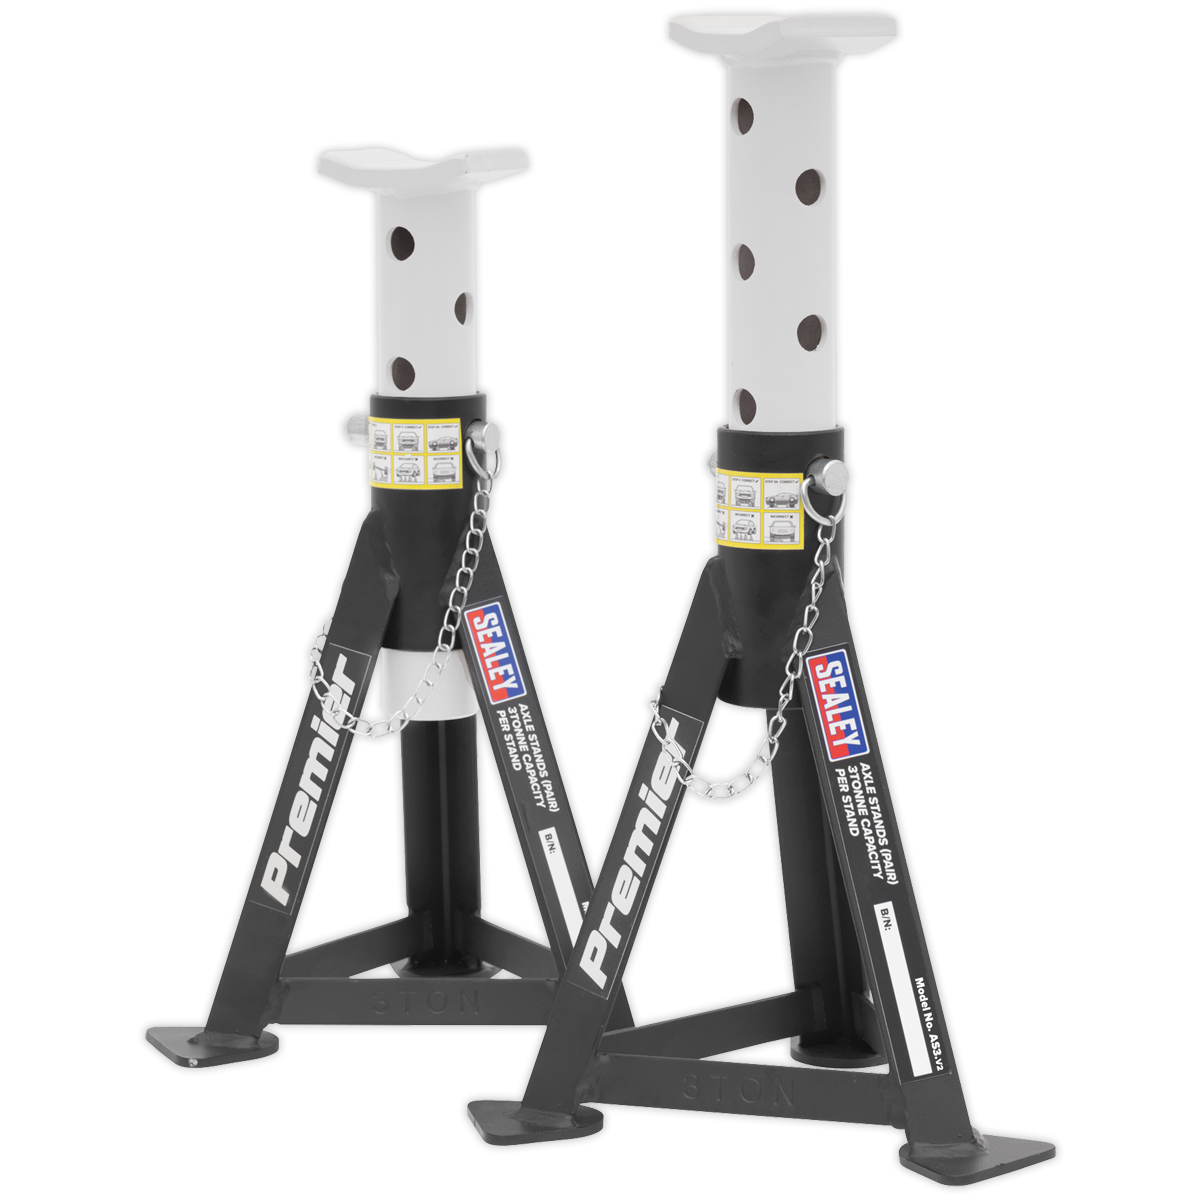 Axle Stands (Pair) 3 Tonne Capacity per Stand - White - AS3 - Farming Parts